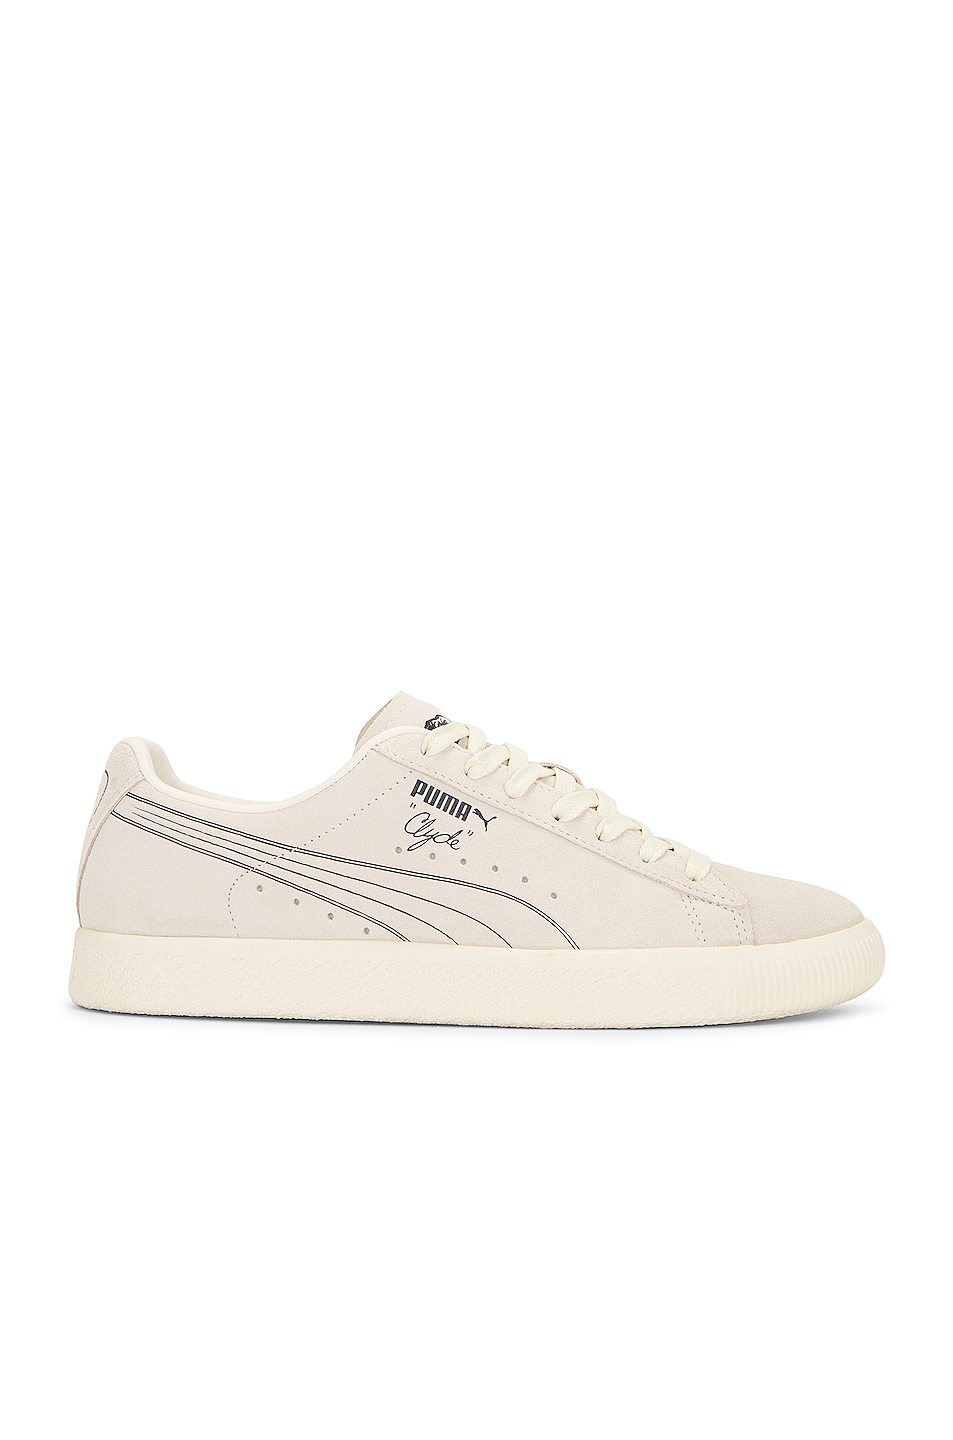 Image 1 of Puma Select Clyde No. 1 Sneakers in Frosted Ivory & Smokey Gray